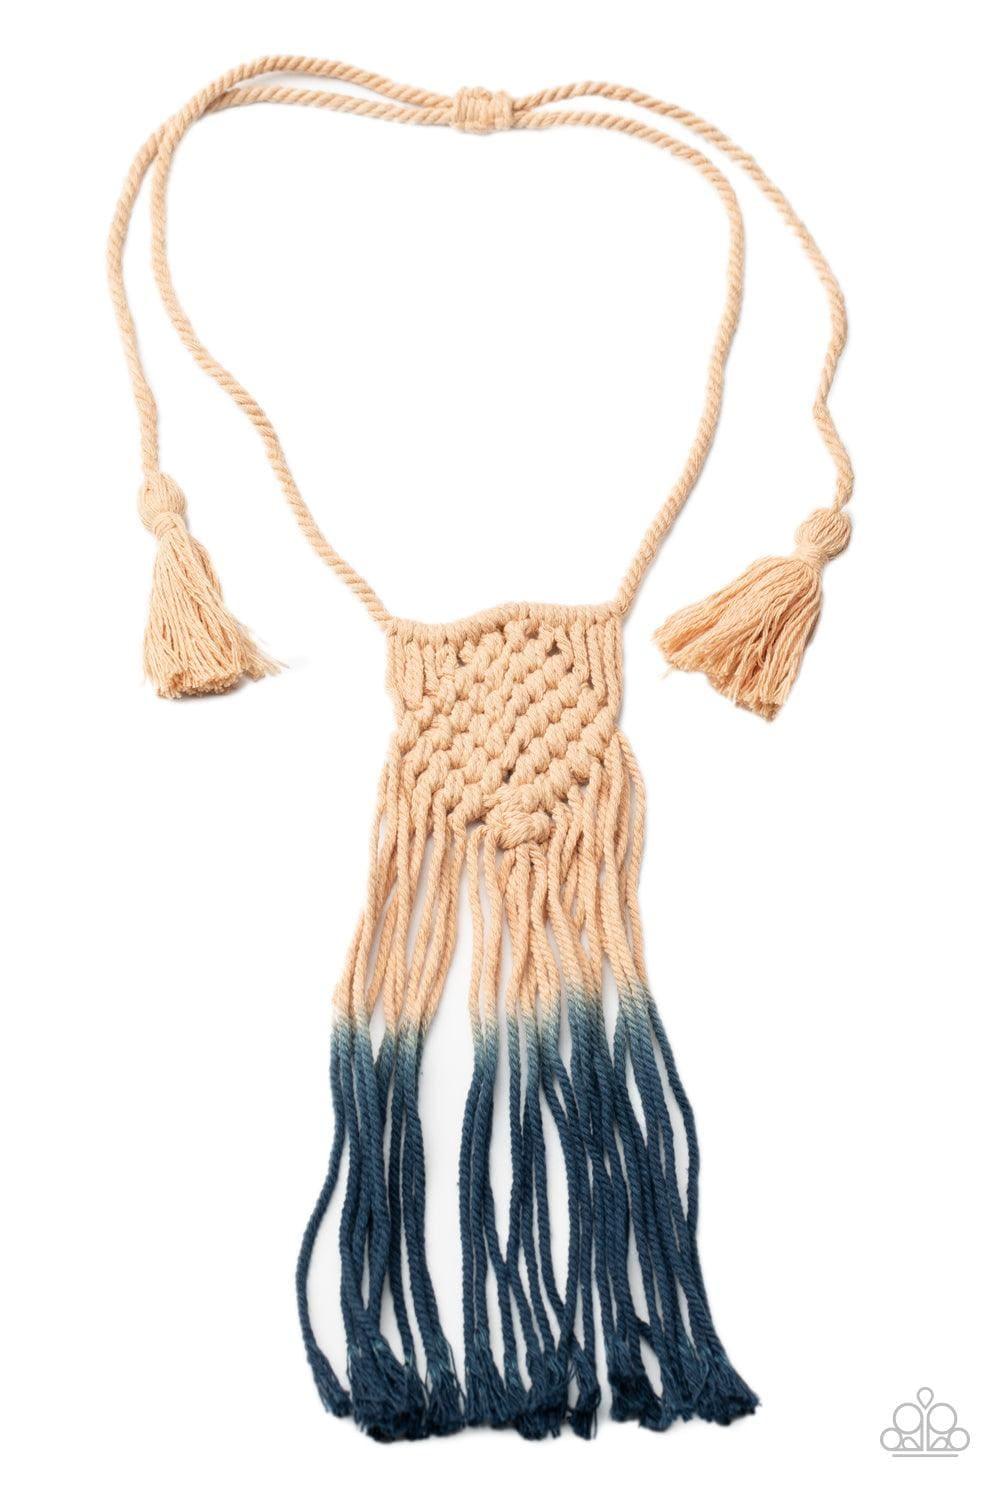 Paparazzi Accessories - Look At Macrame Now - Blue Necklace - Bling by JessieK